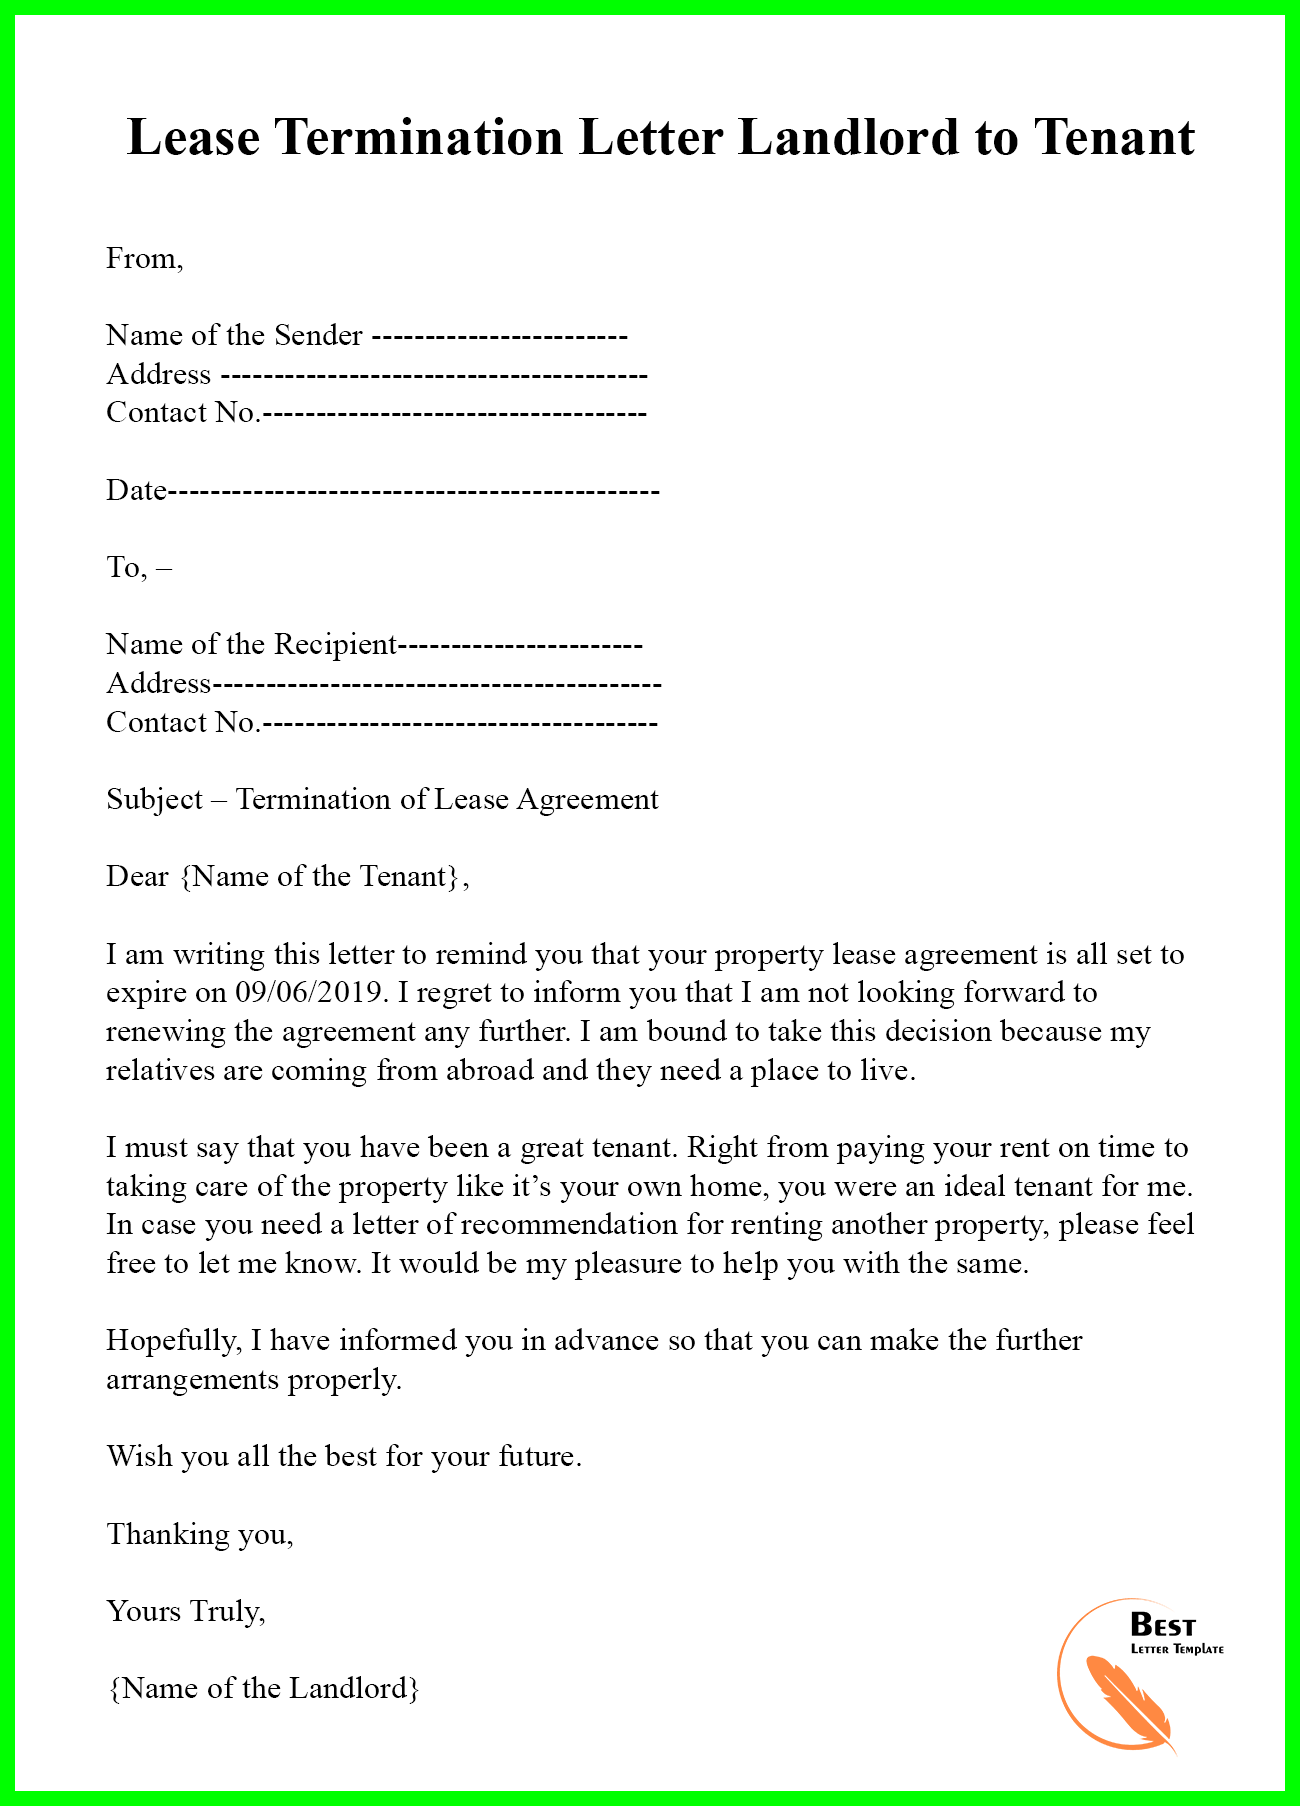 Lease Termination Letter To Tenant From Landlord Onvacationswall